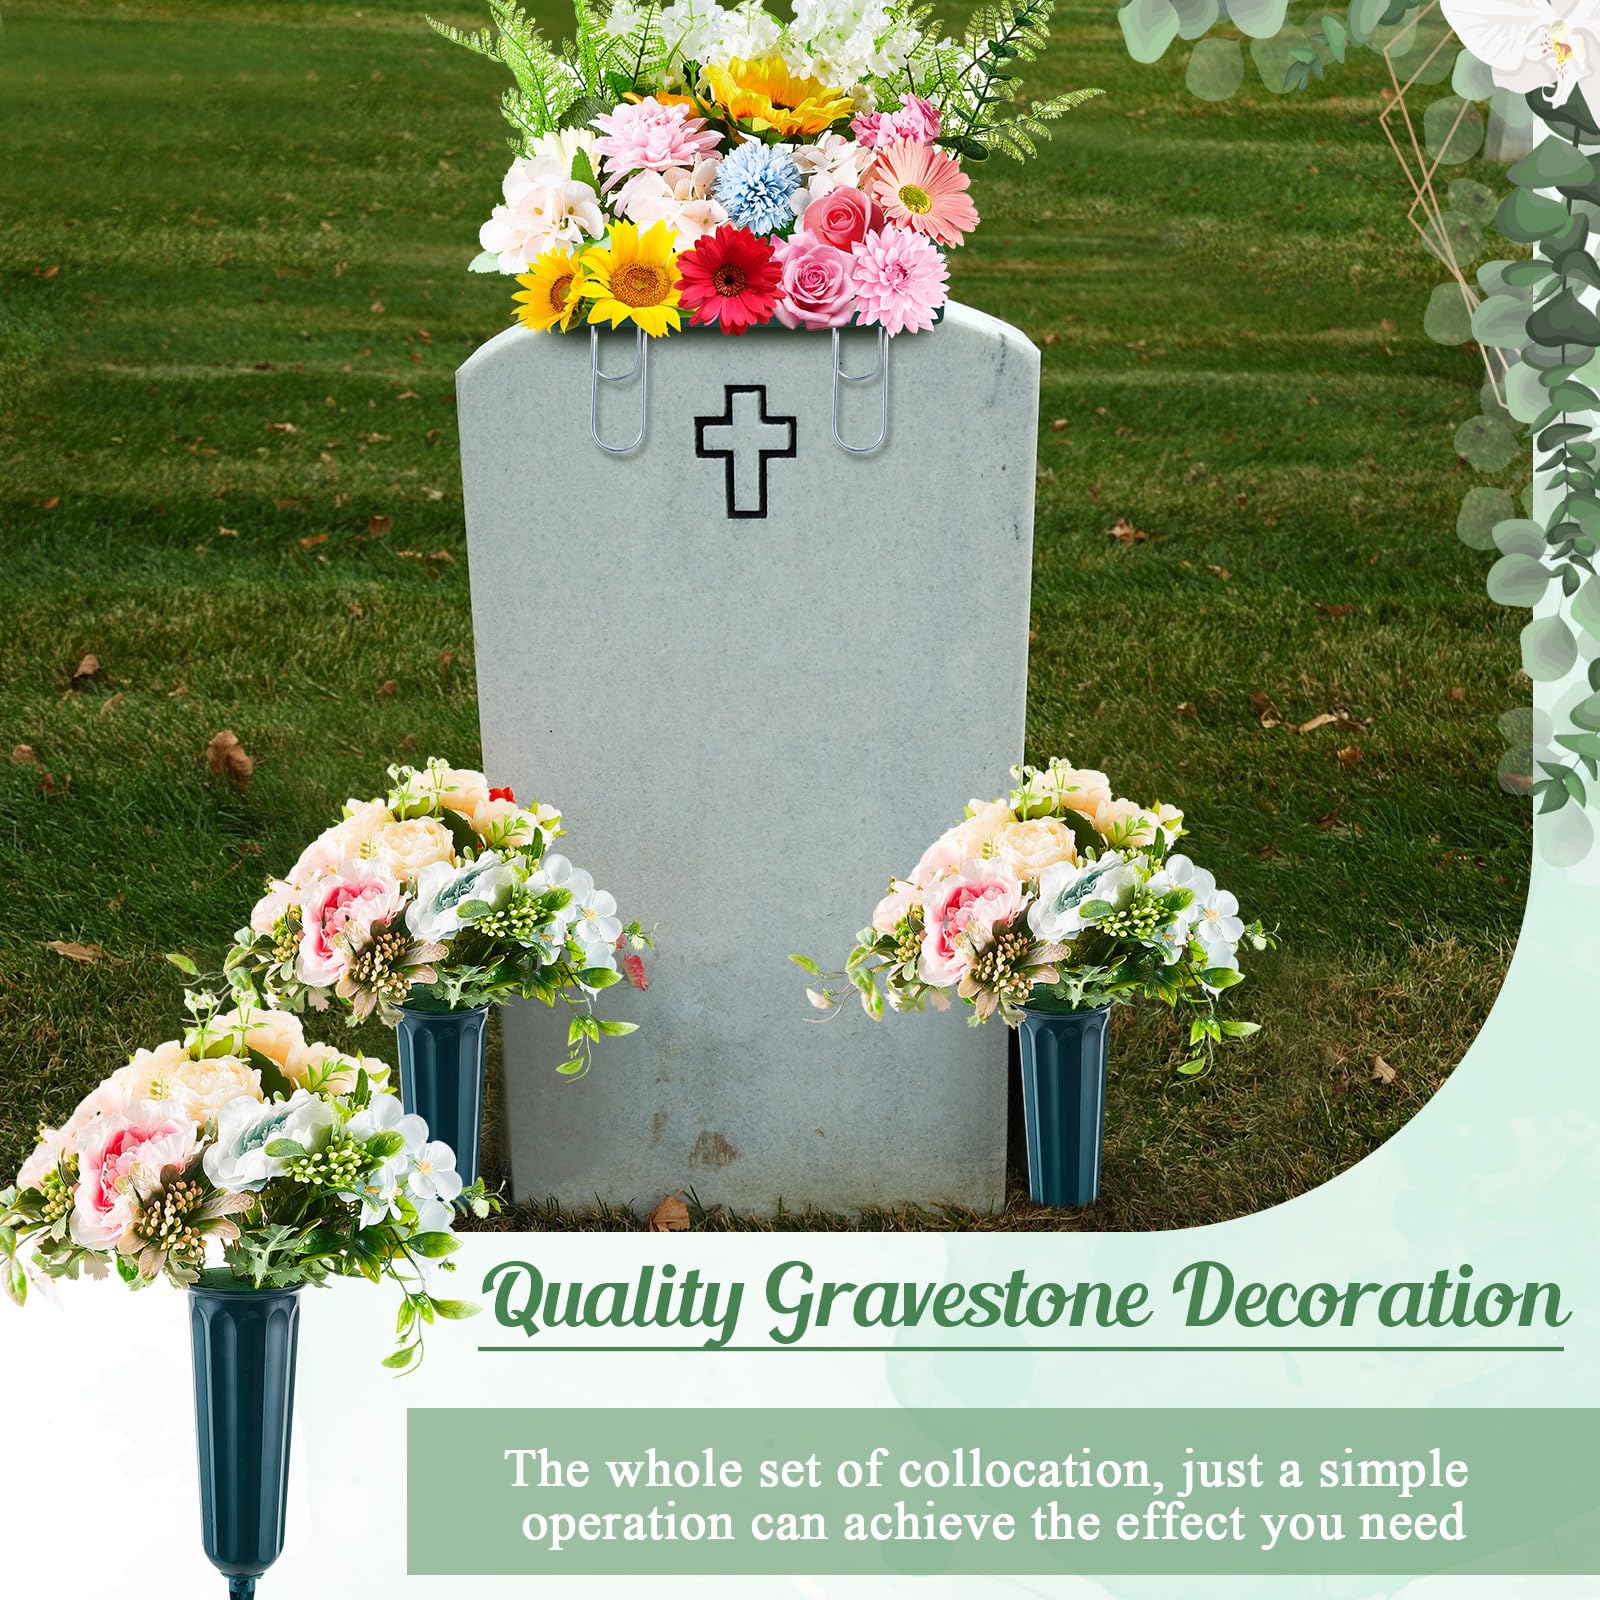 Zonon 3 Pcs Headstone Flower Saddle and Cemetery Vases with Spikes Set Includes 1 Pcs 12 Inch Gravestone Saddle with Floral Foam 2 Pcs Grave Flower Holder with Foam Inserts for Cemetery Decorations